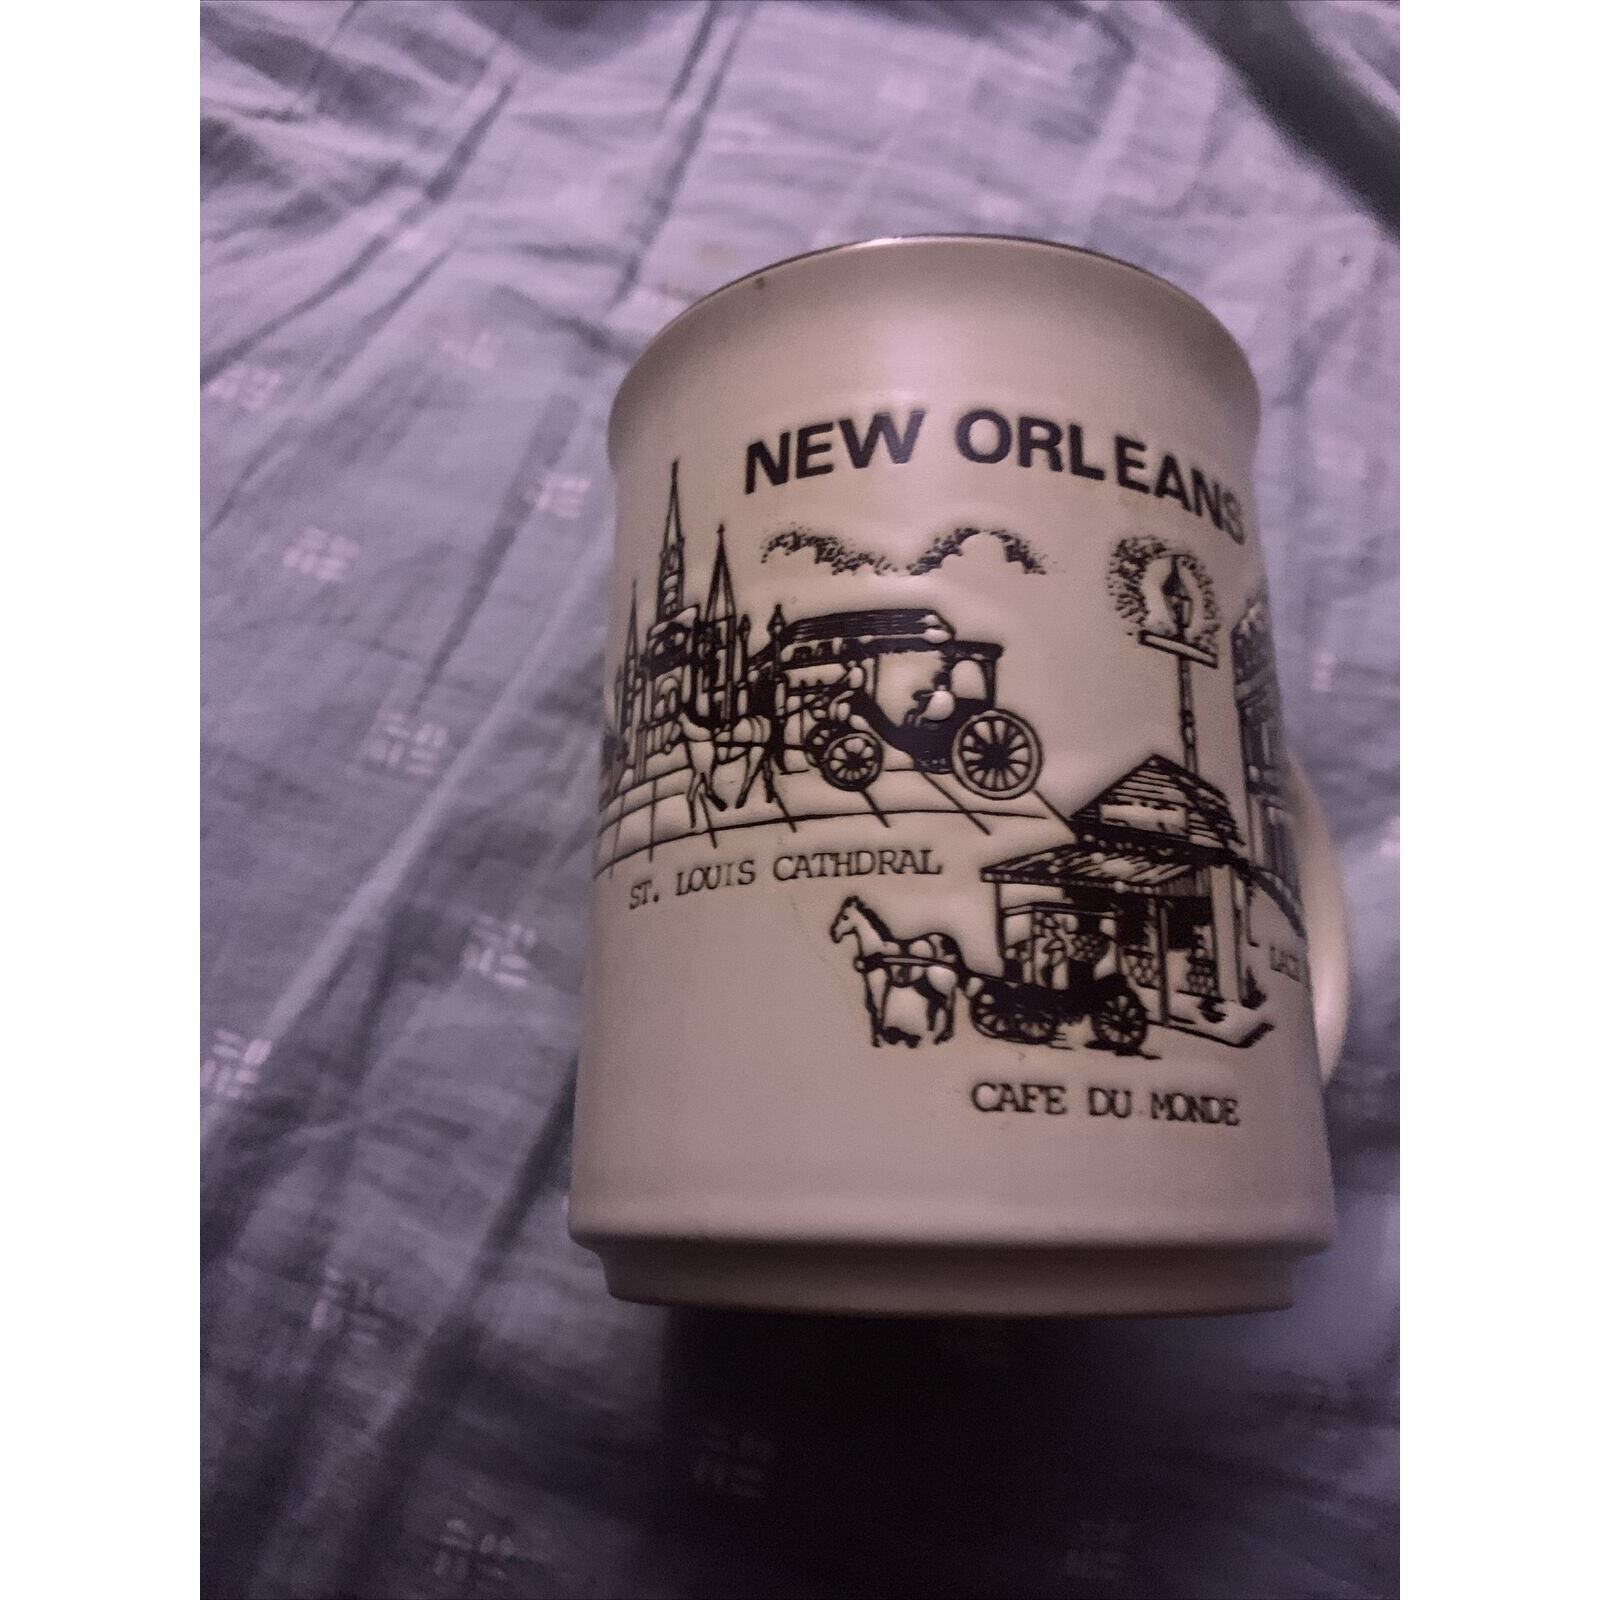 Vintage New Orleans “Tour Of The City” Collectible Mug